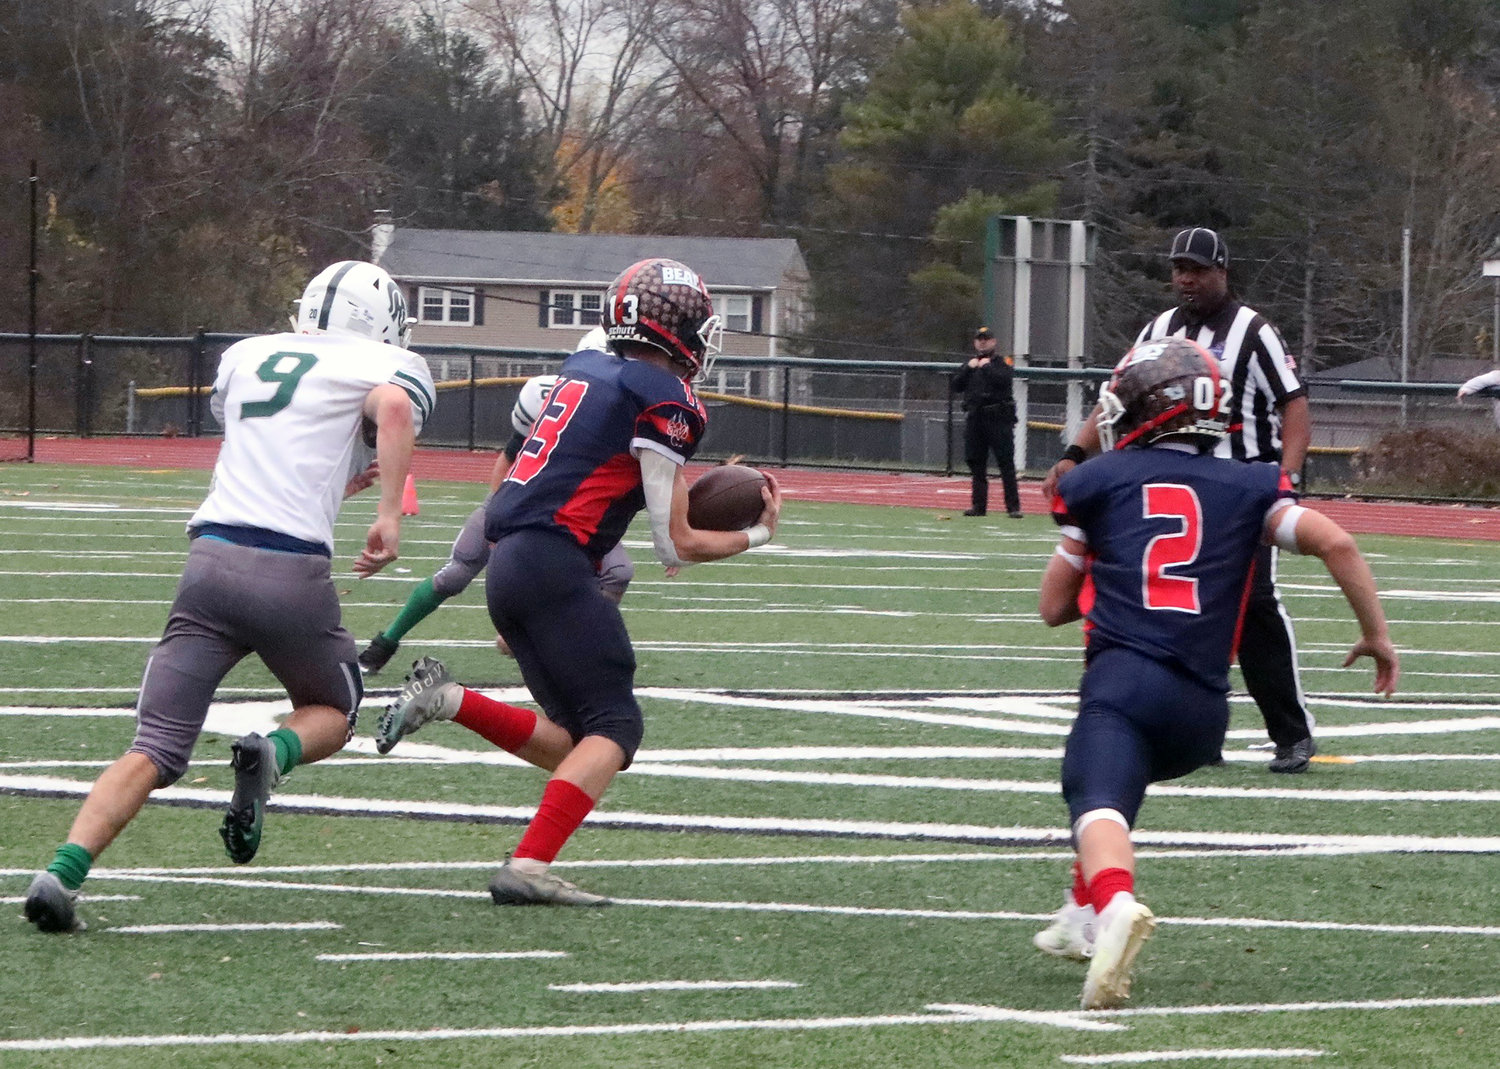 Senior linebacker Talan Scanna intercepts a Dan Collins fourth down pass in one of the key defensive plays evinced by the Bears.